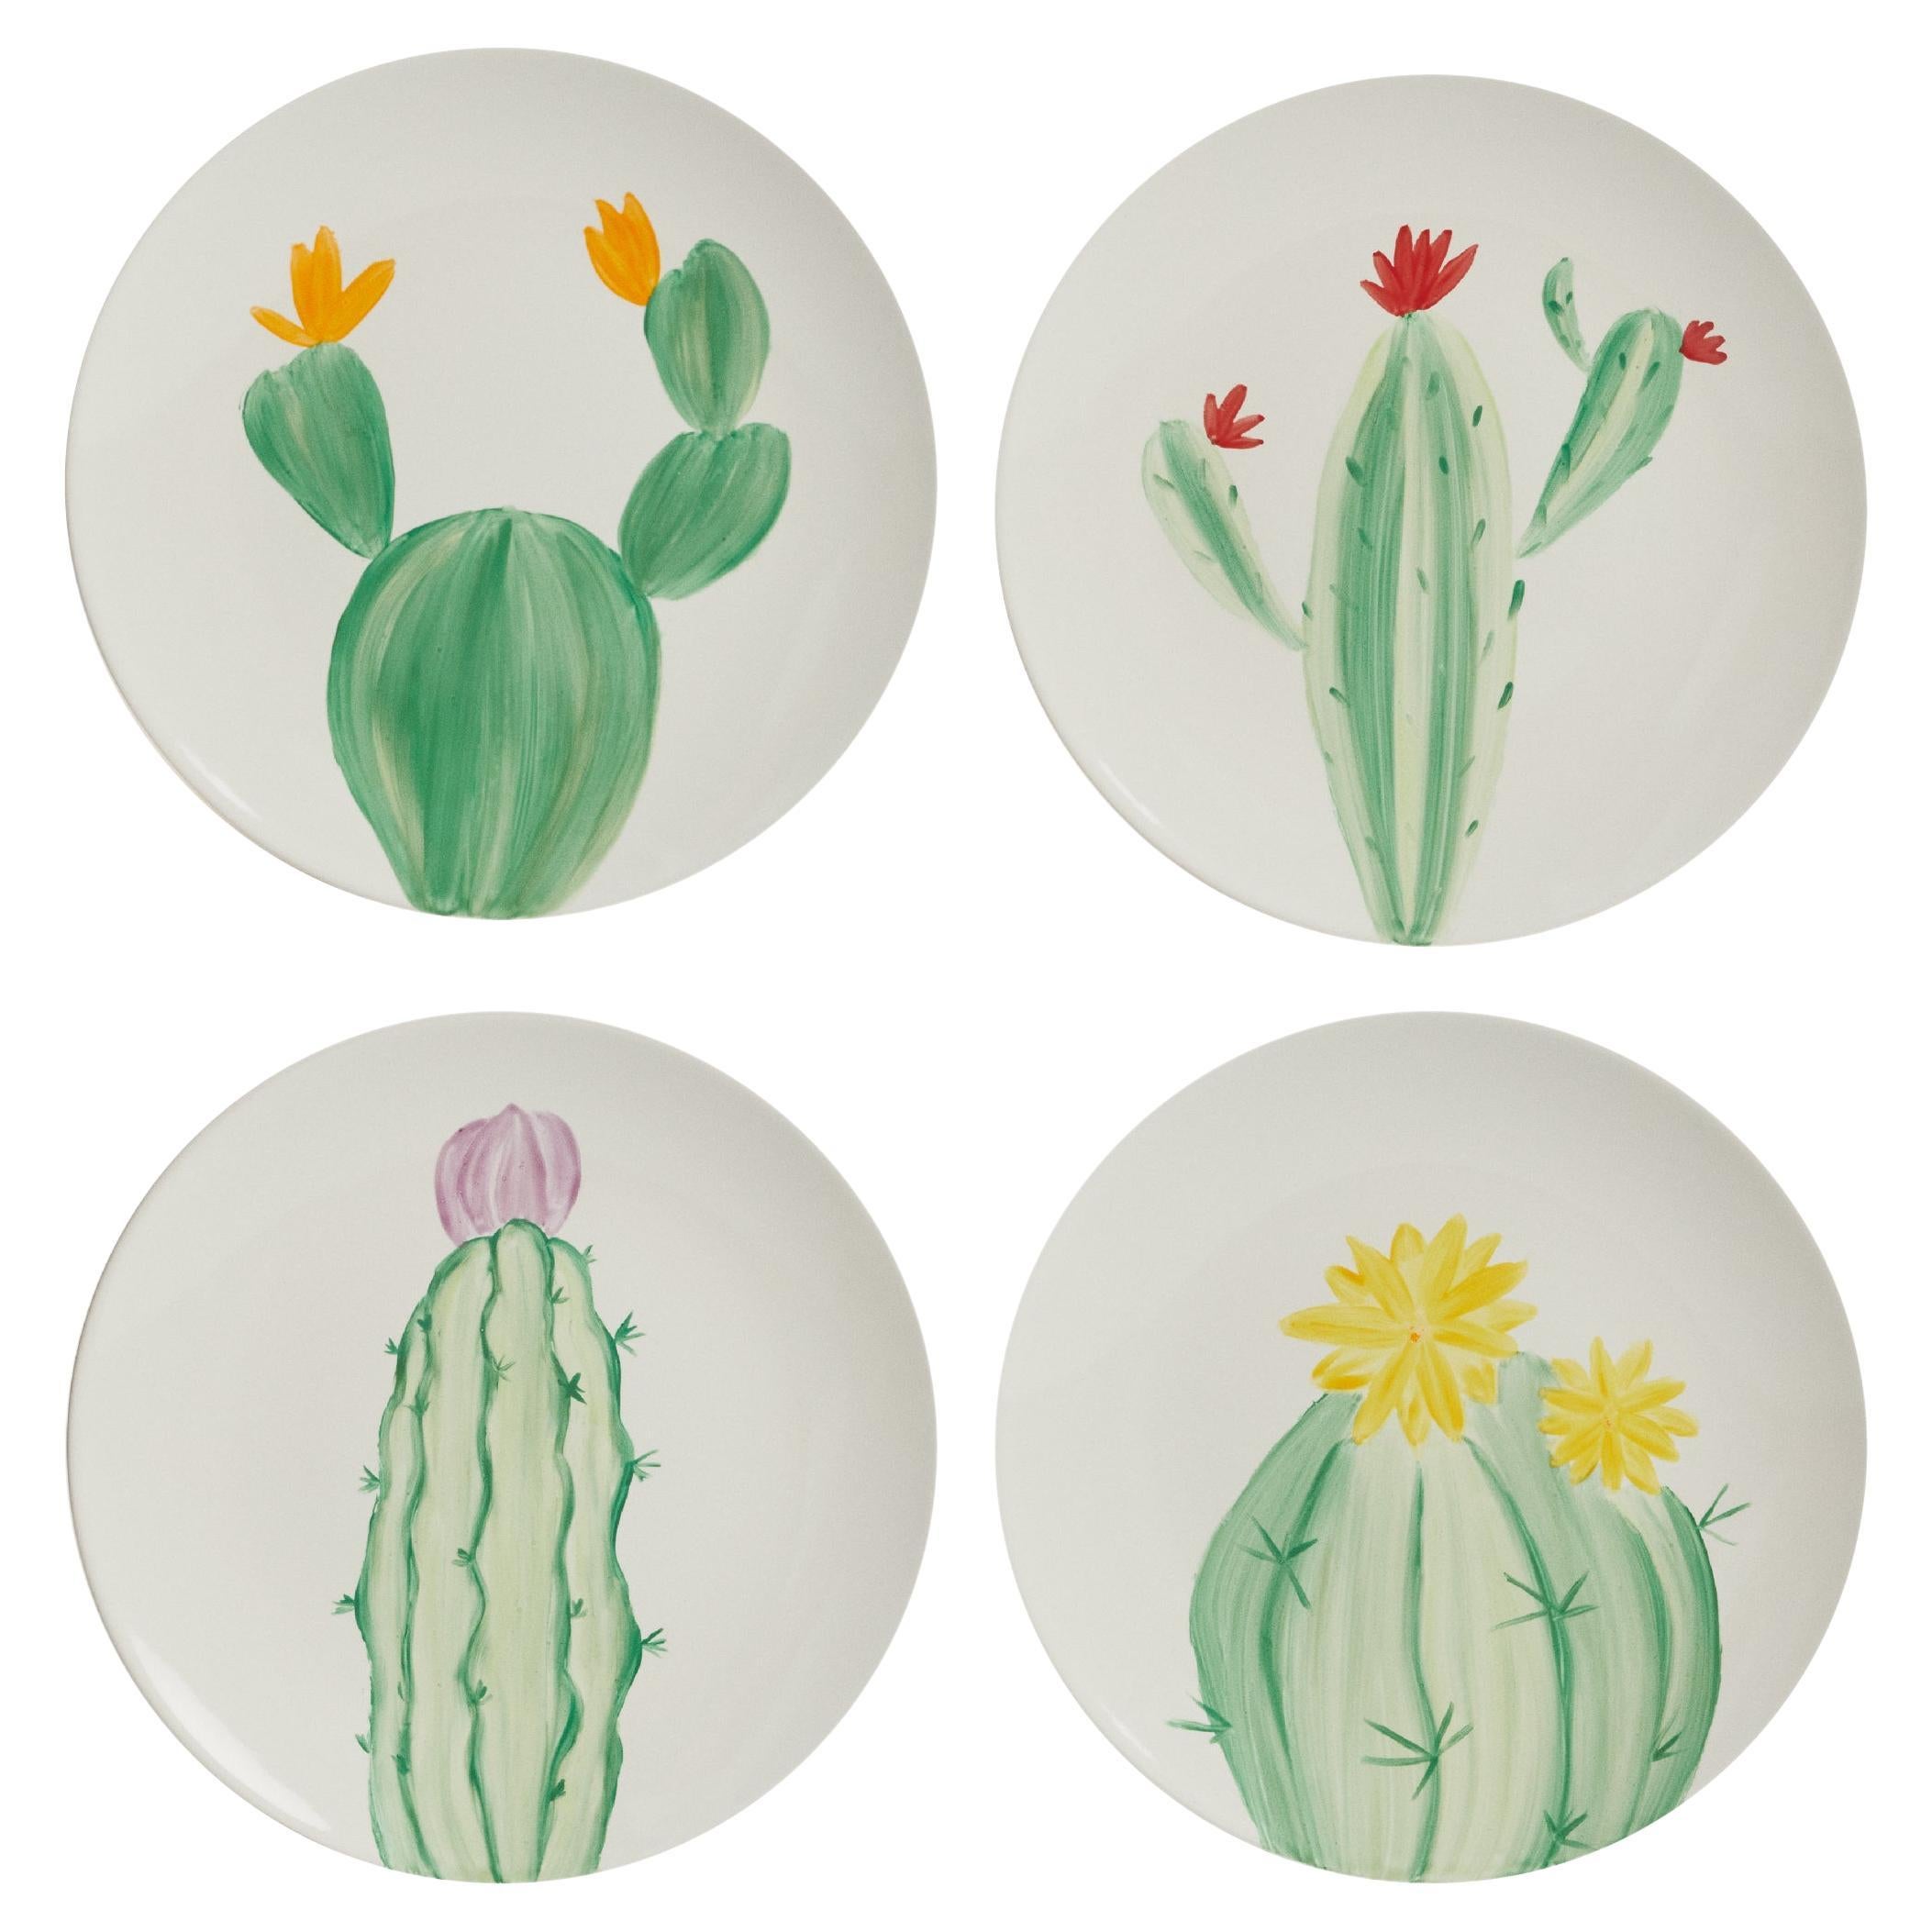 Spicy Cactus Hand Painted Plates Collection For Sale